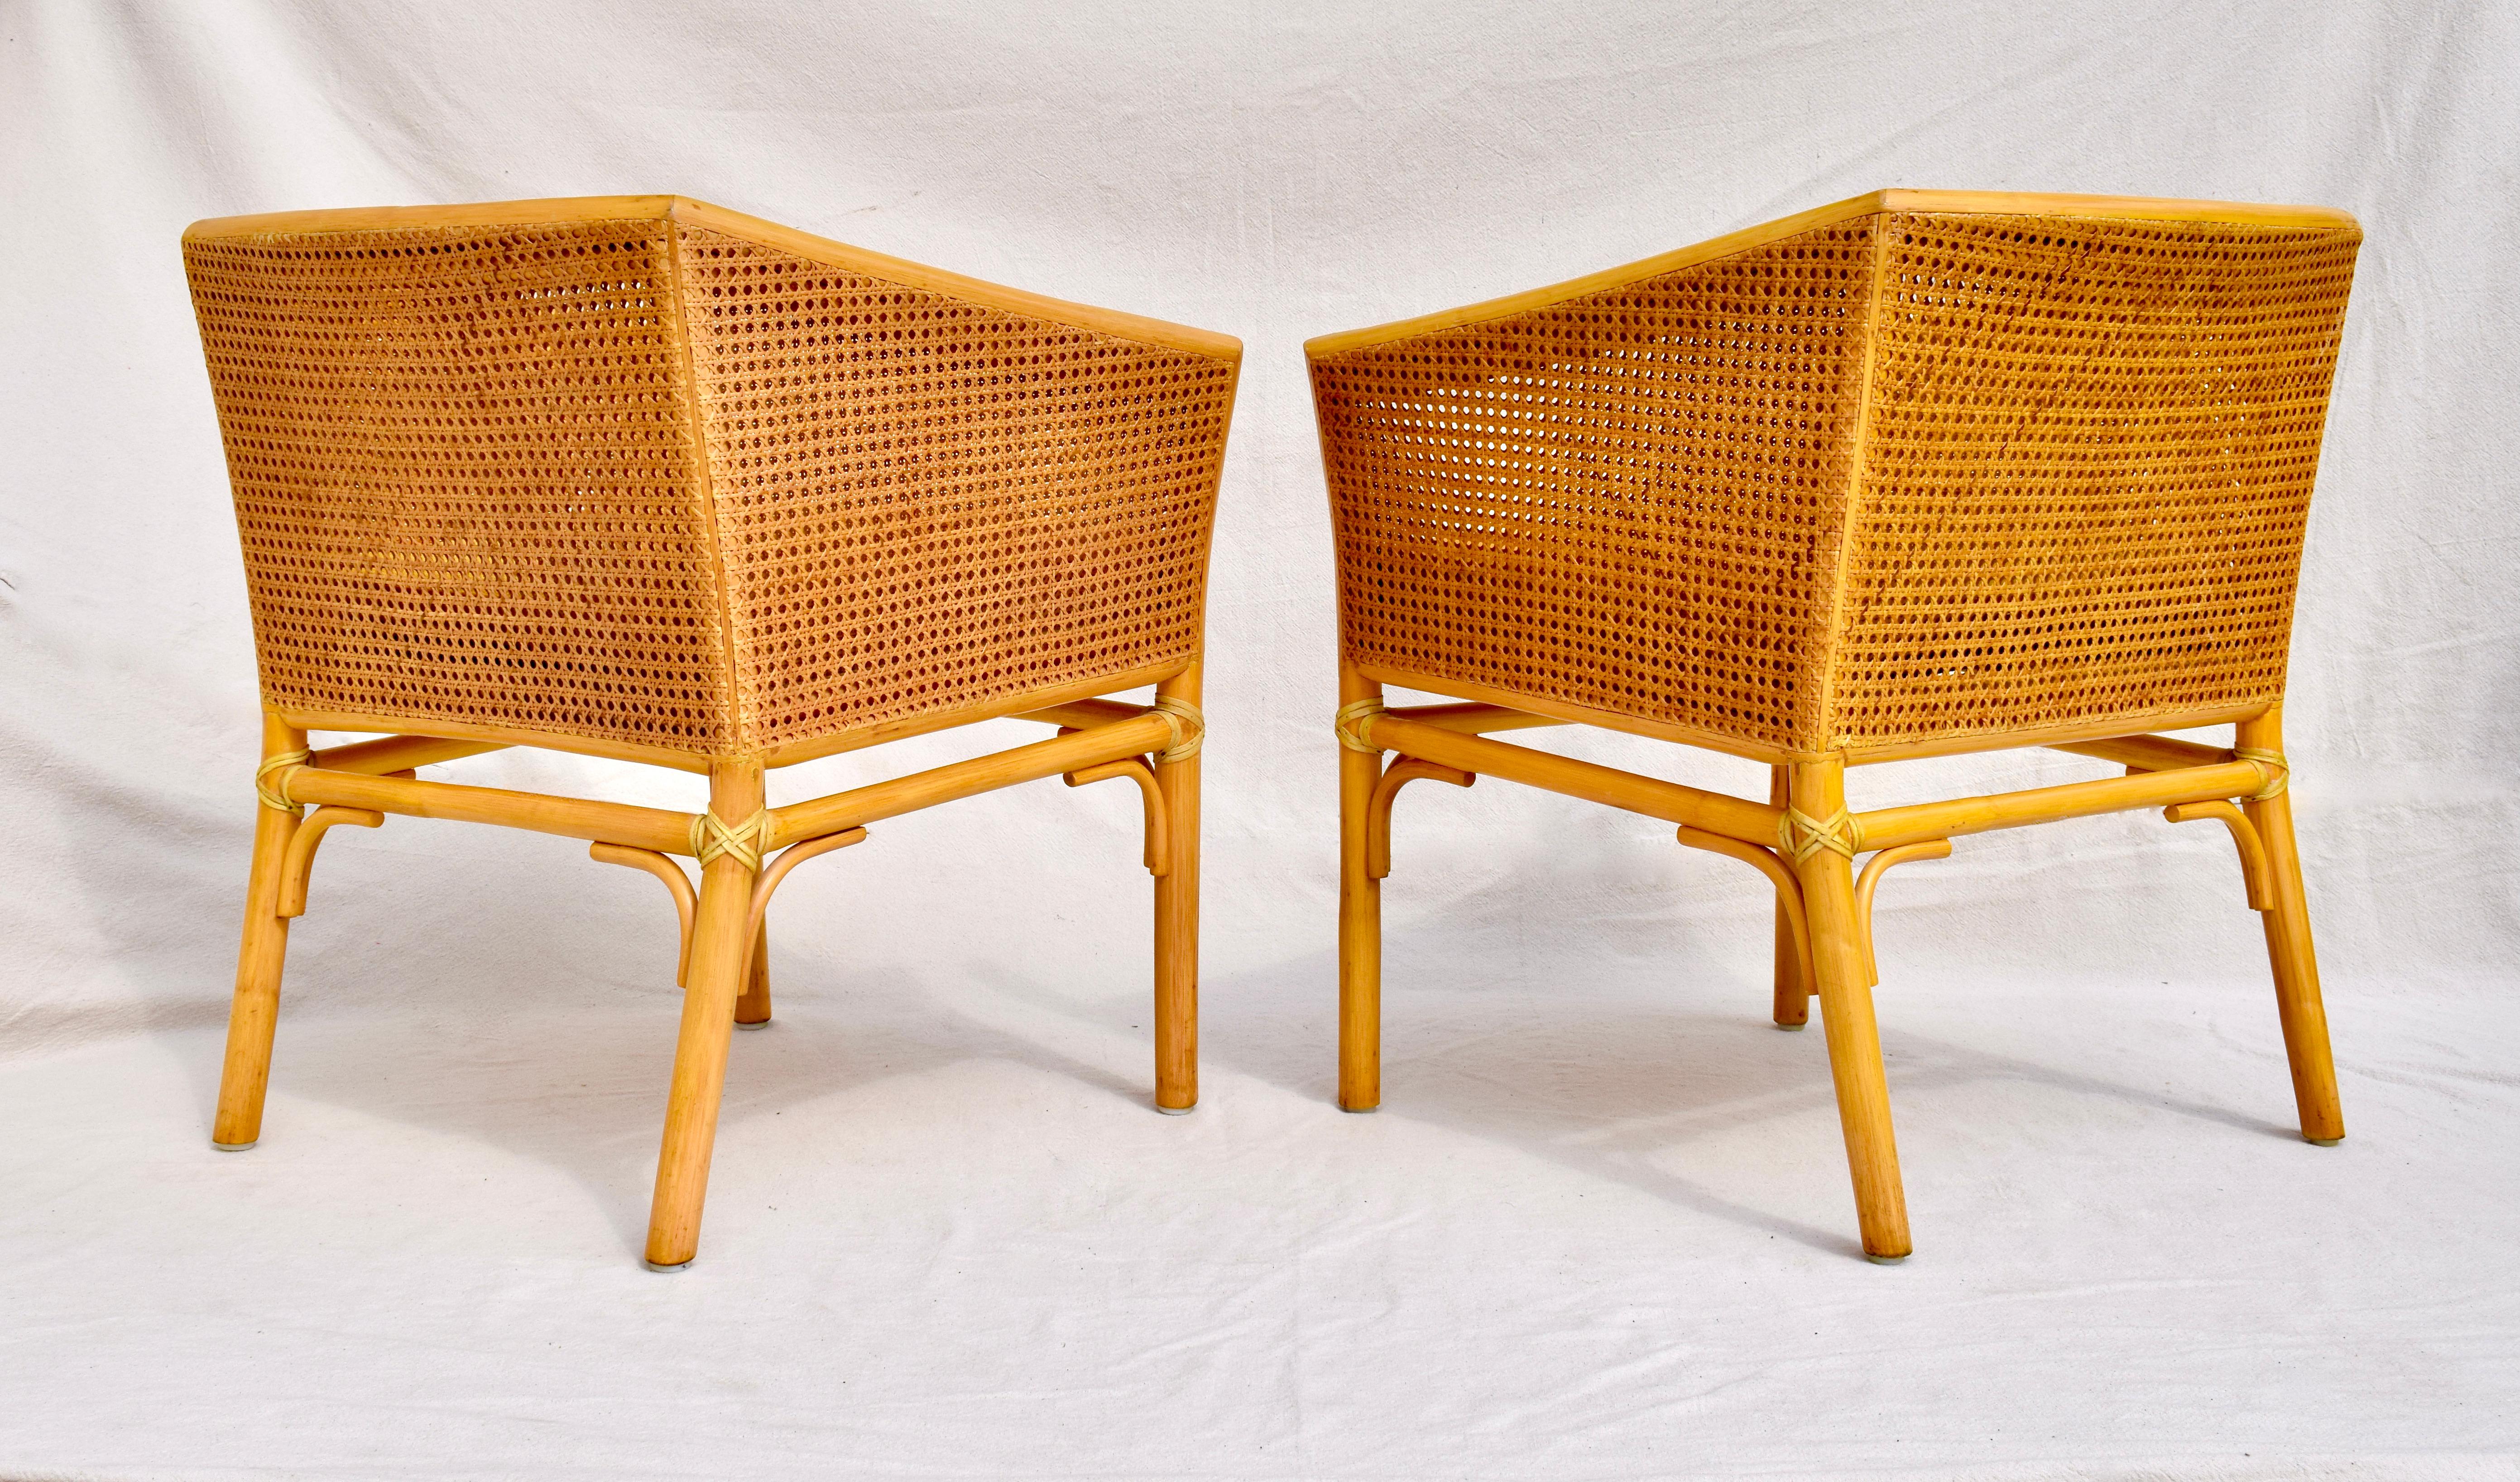 20th Century McGuire Organic Modern Double Caned Rattan Pair of Chairs